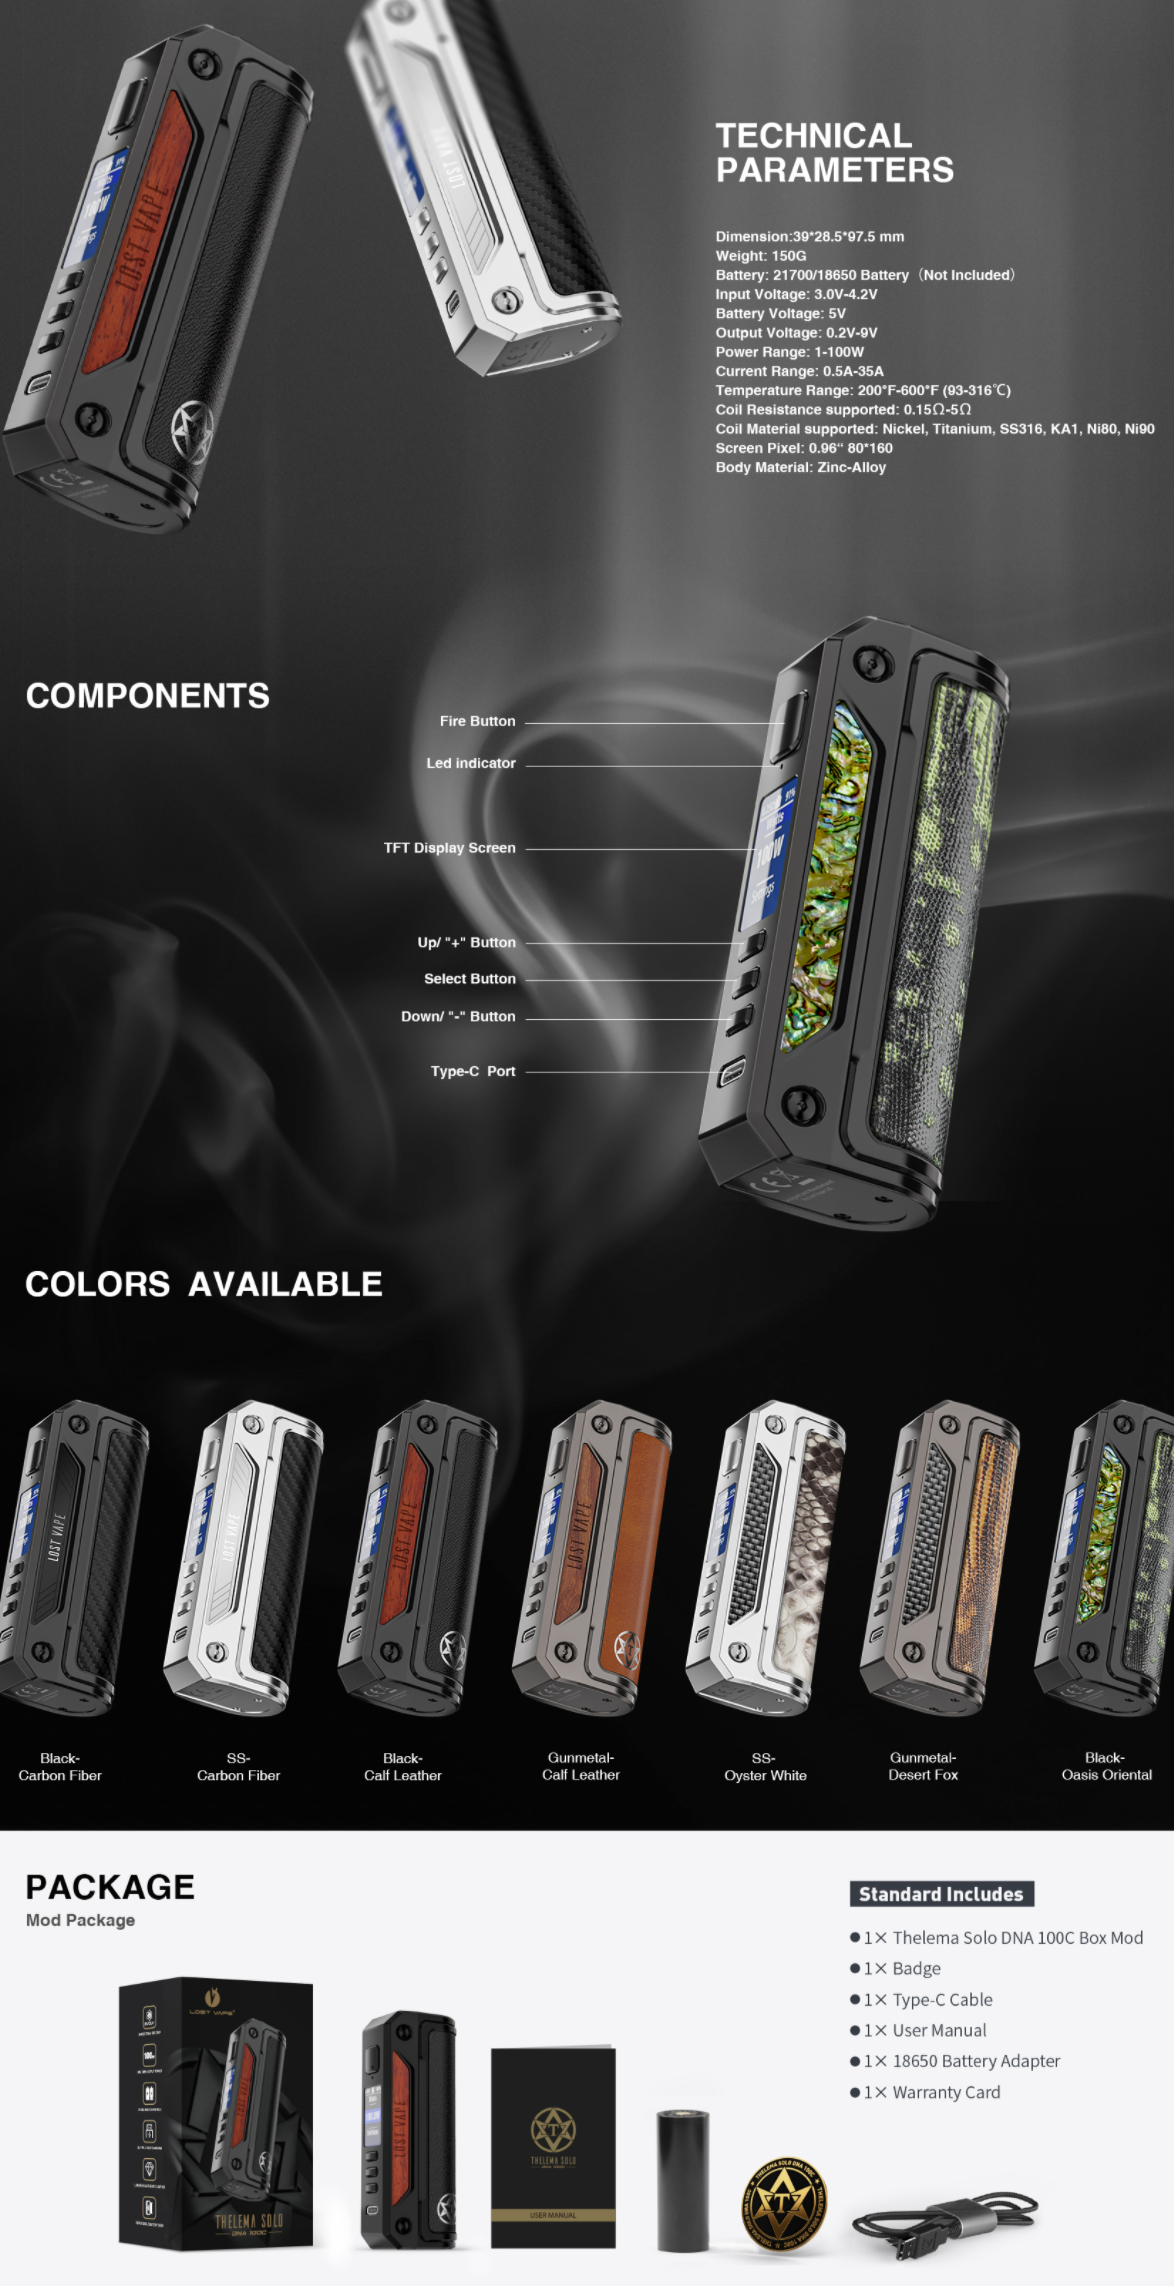 Thelema Solo DNA 100C Box Mod UK Purcahse